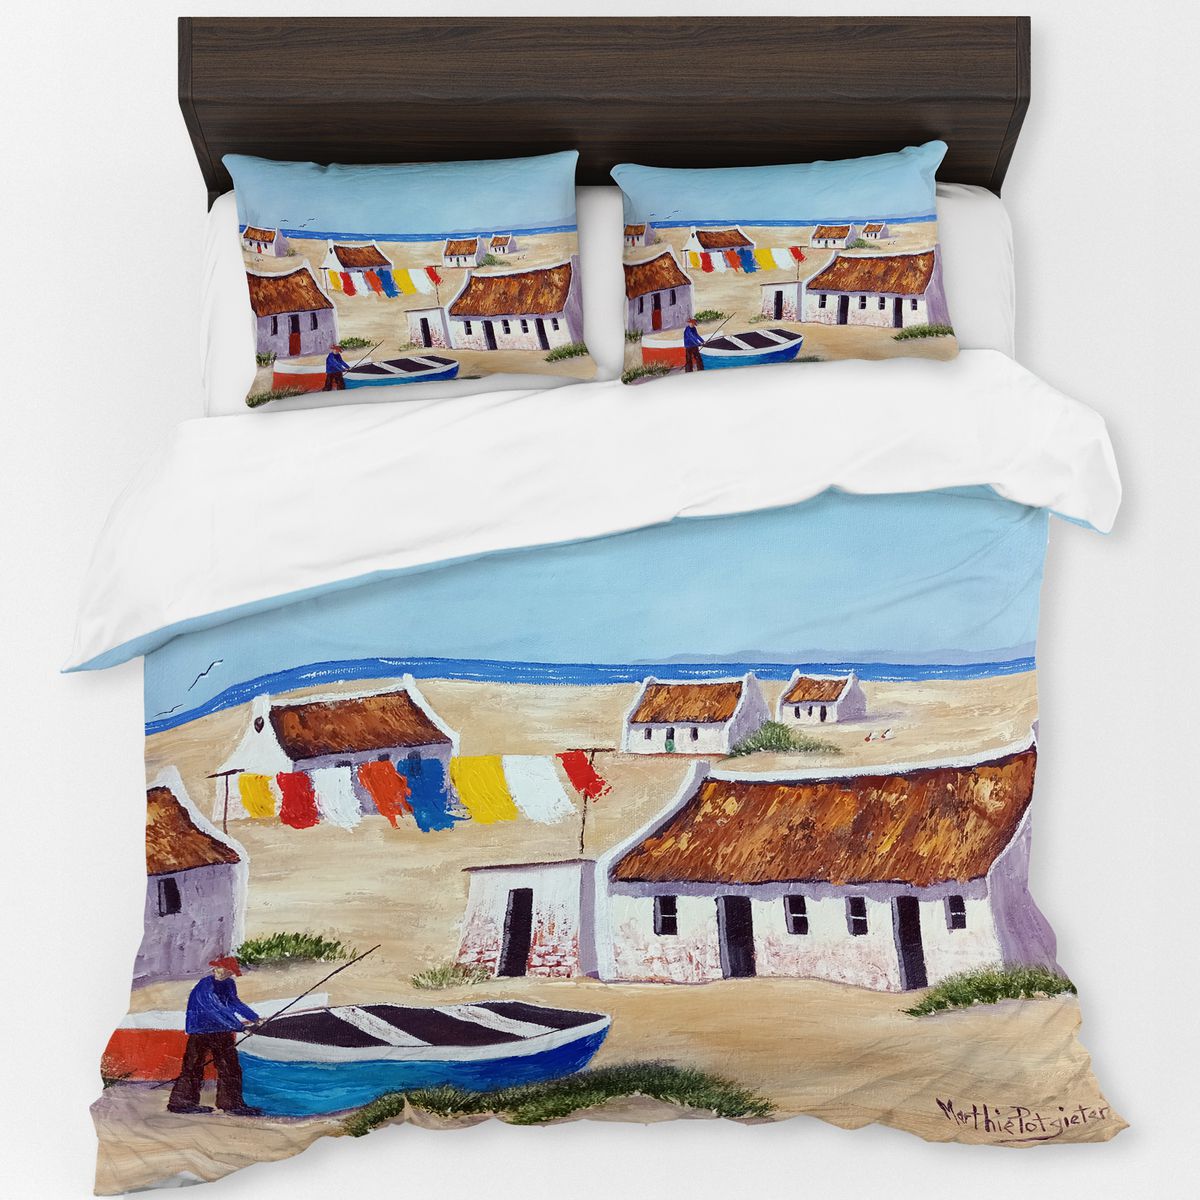 A Fisherman's Life By Marthie Potgieter Duvet Cover Set